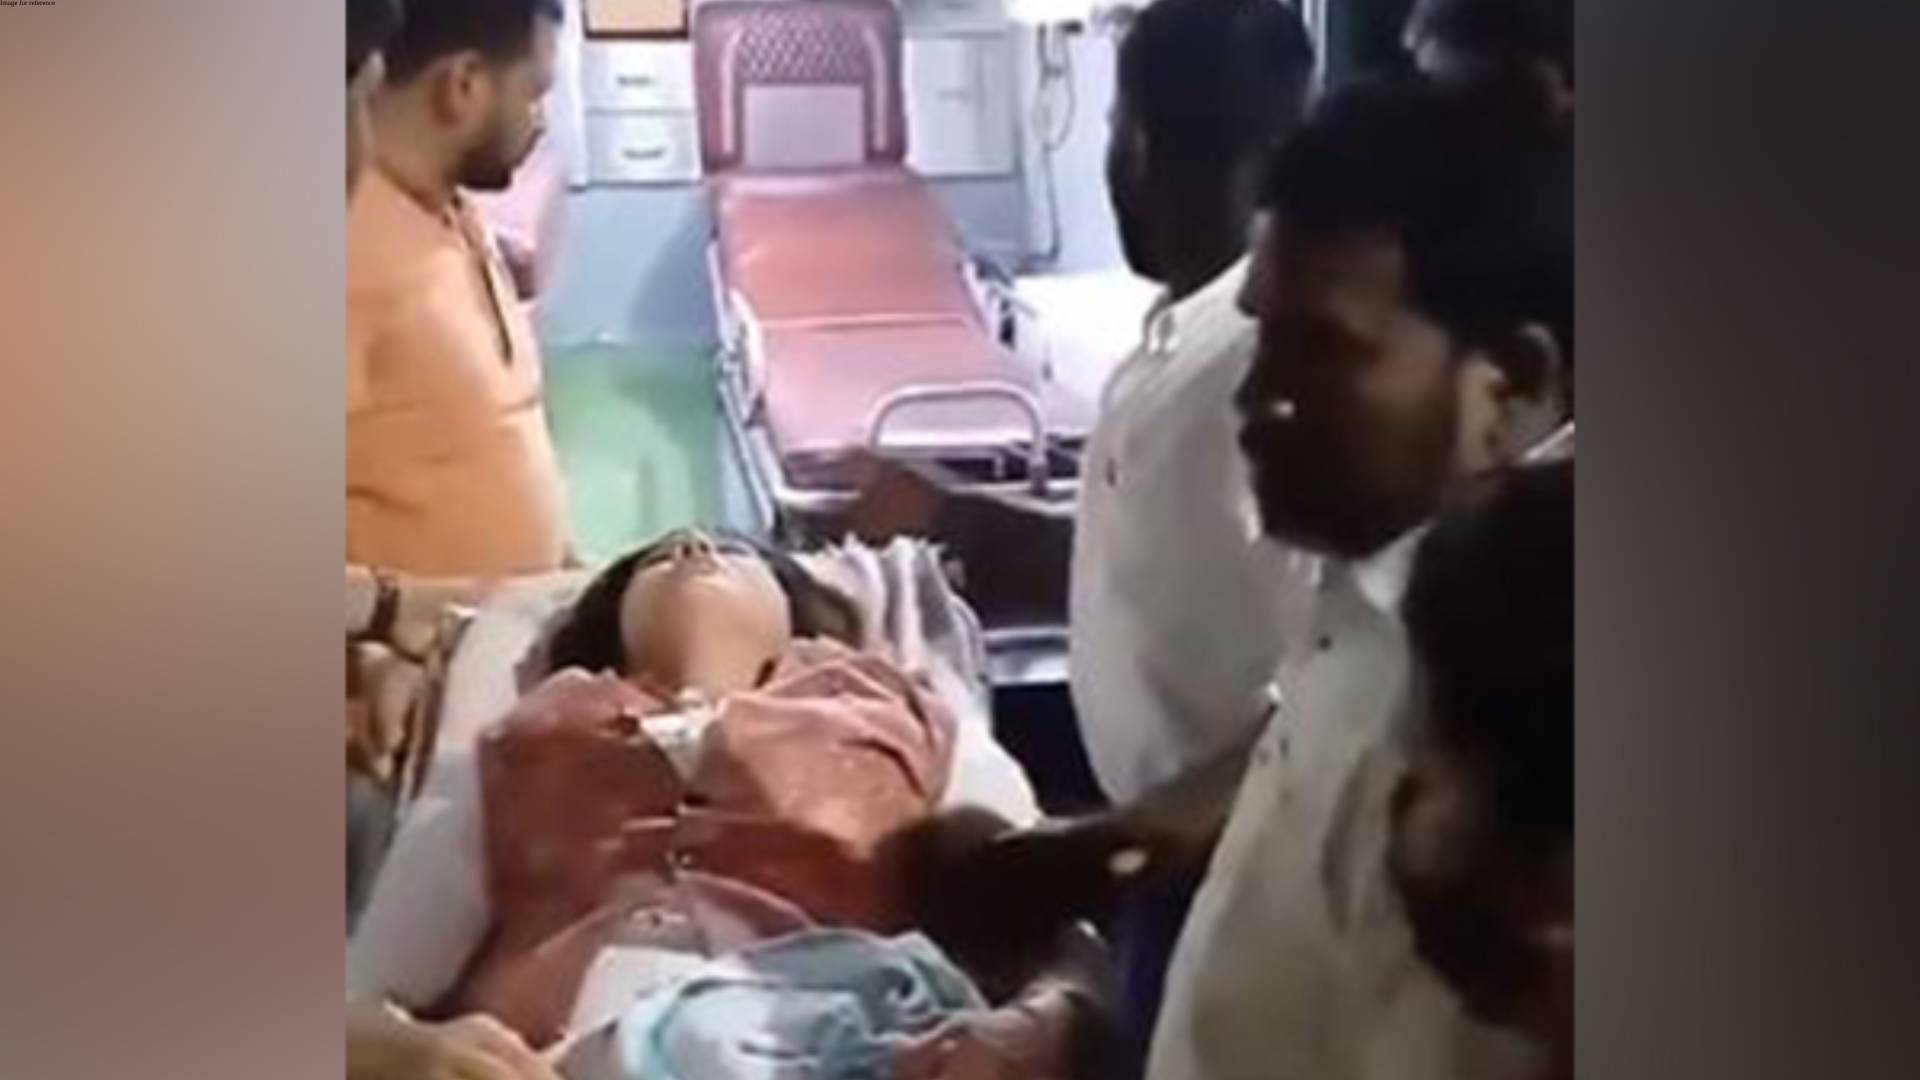 SP's Gorakhpur candidate Kajal Nishad referred to Lucknow hospital after health condition deteriorated